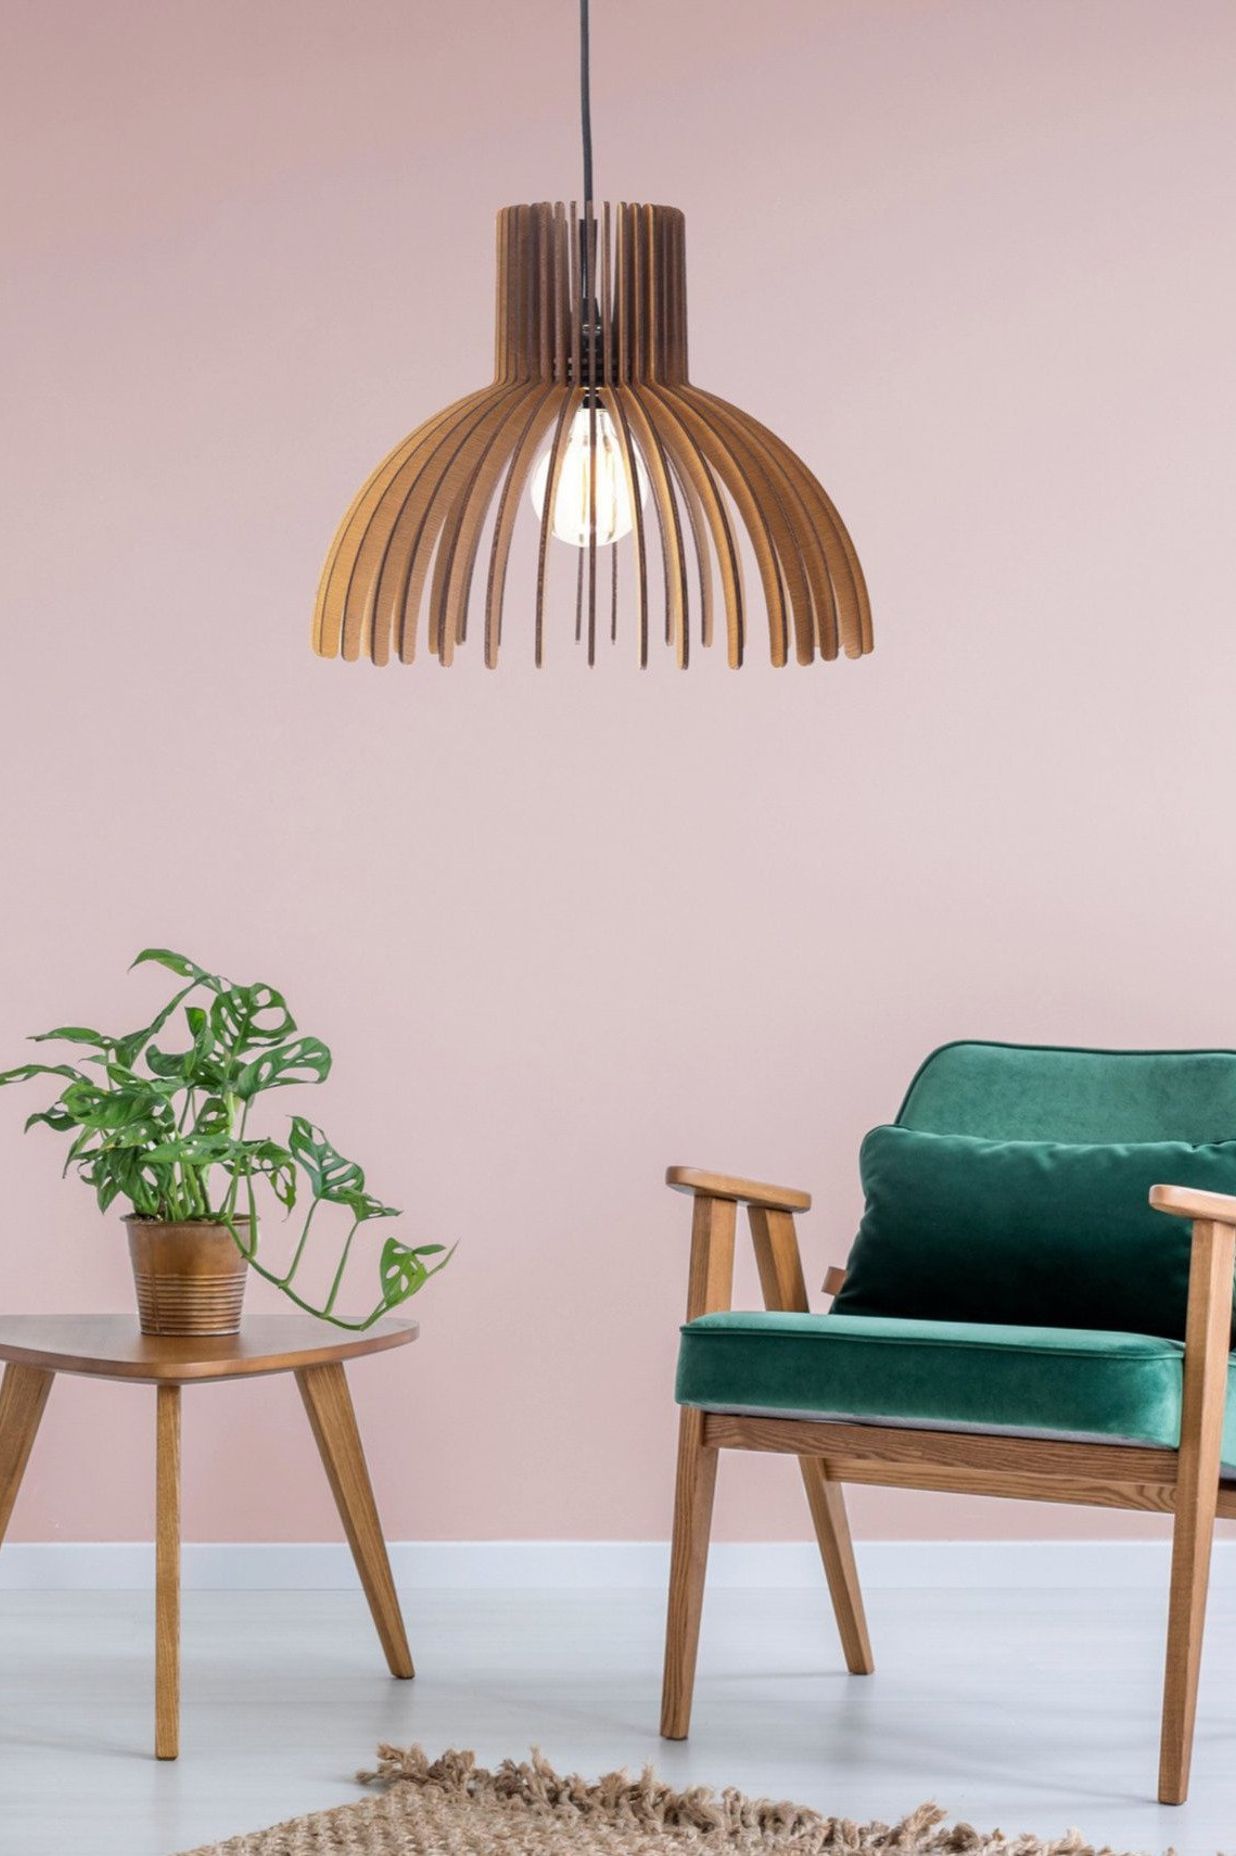 The 'Bell' pendant light by Dezaart, a contemporary plywood pendant made in Greece and available from Social Light.